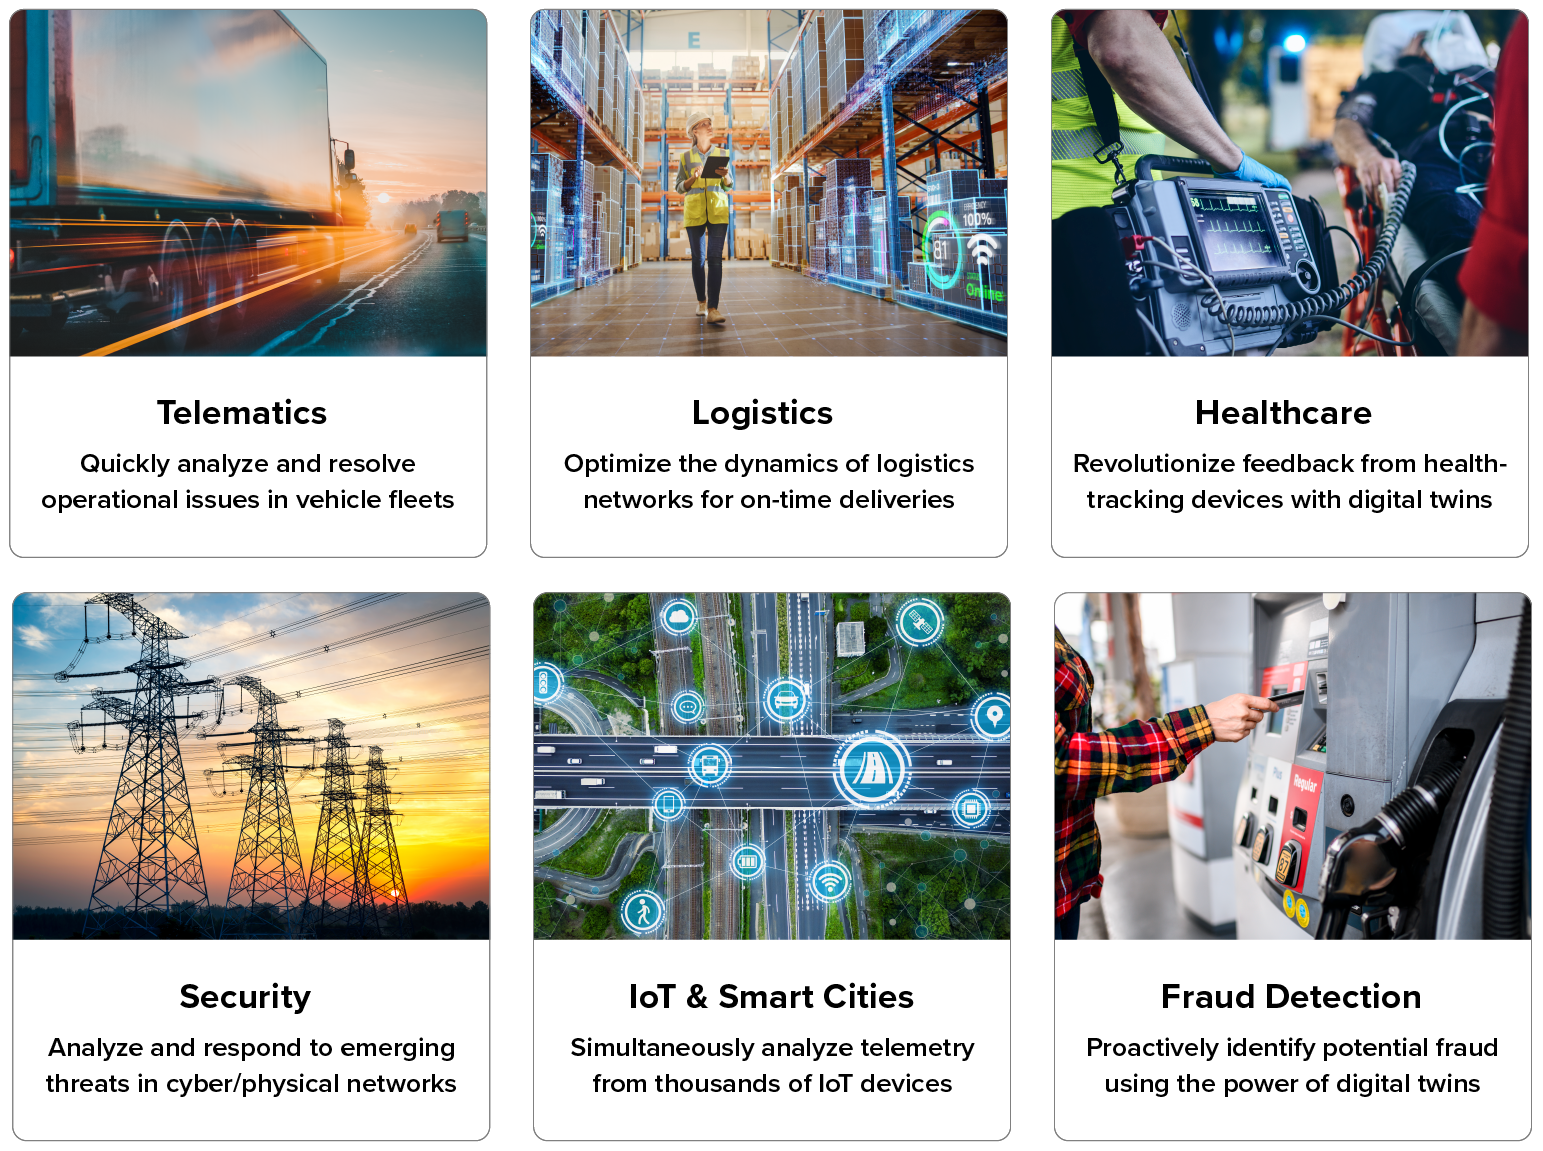 Six use cases for building digital-twin simulations: telematics, logistics, healthcare, security, IoT & smart cities, and fraud detection.